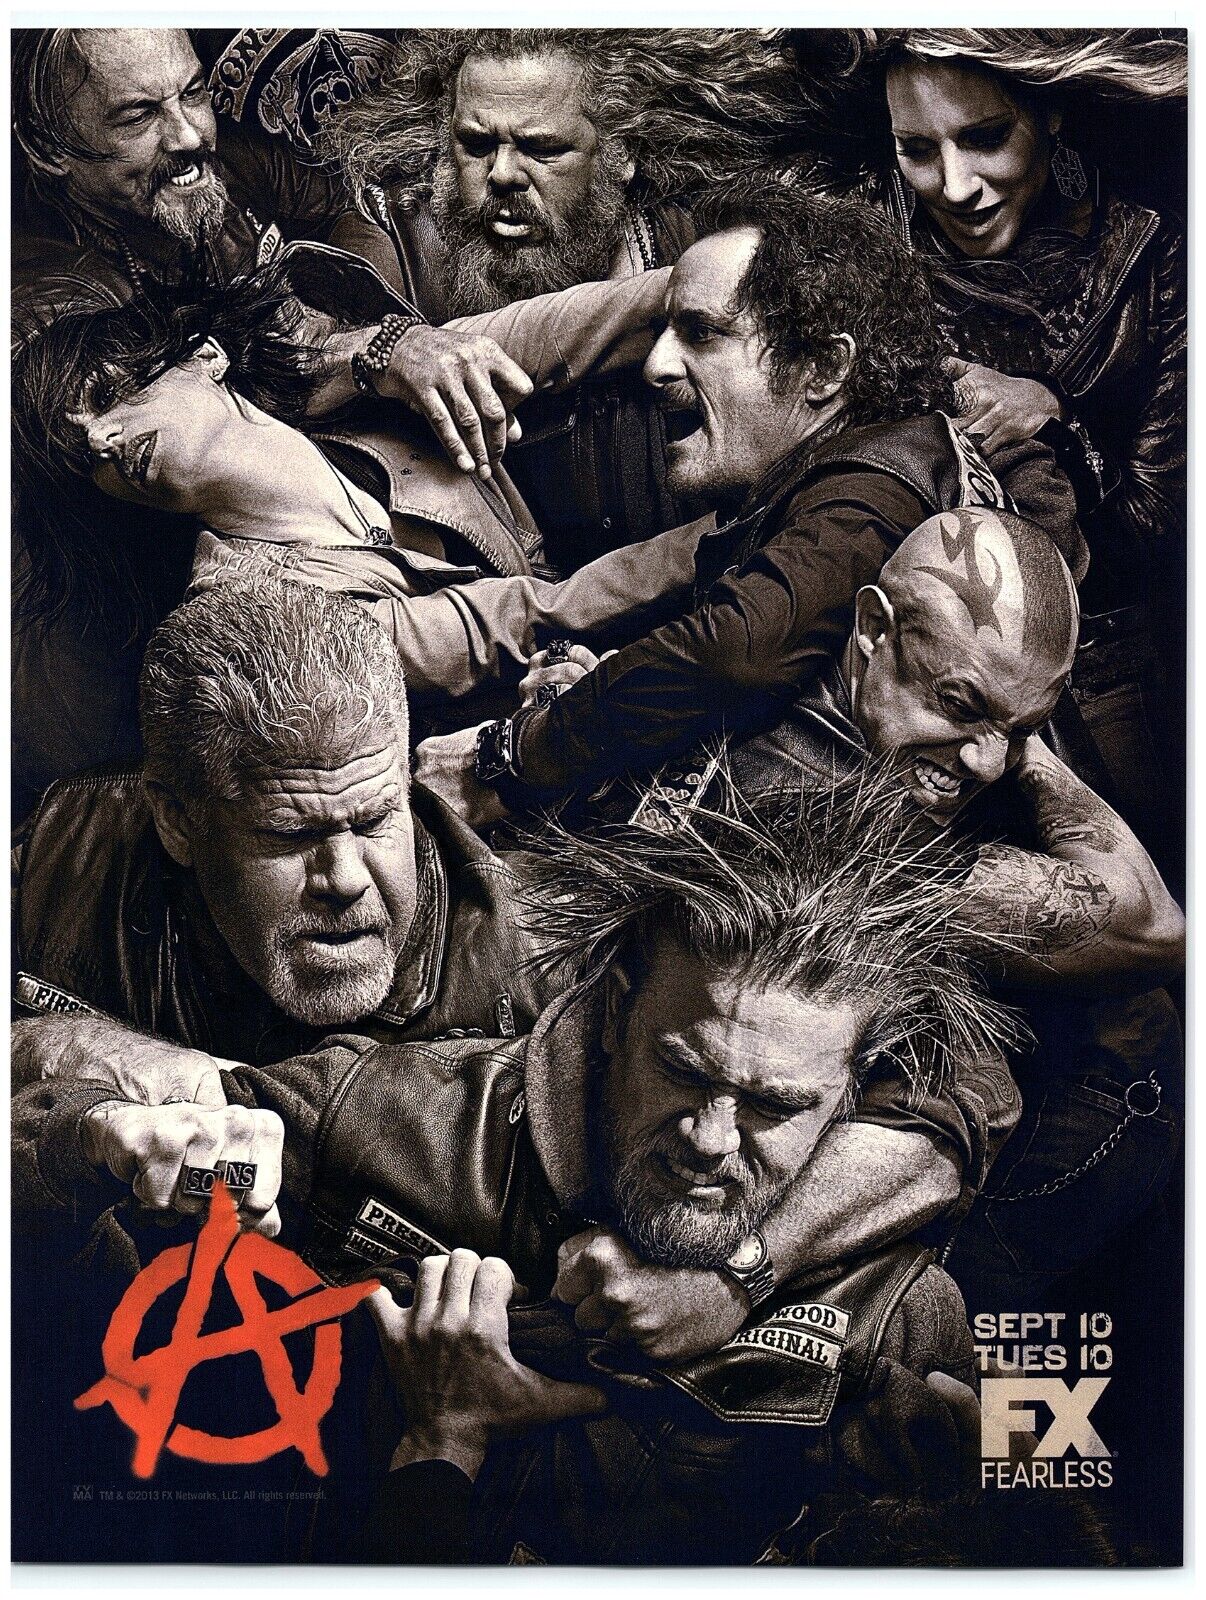 2013 Sons of Anarchy Series Show Poster Print Ad, FX Fearless Perlman Hunnam